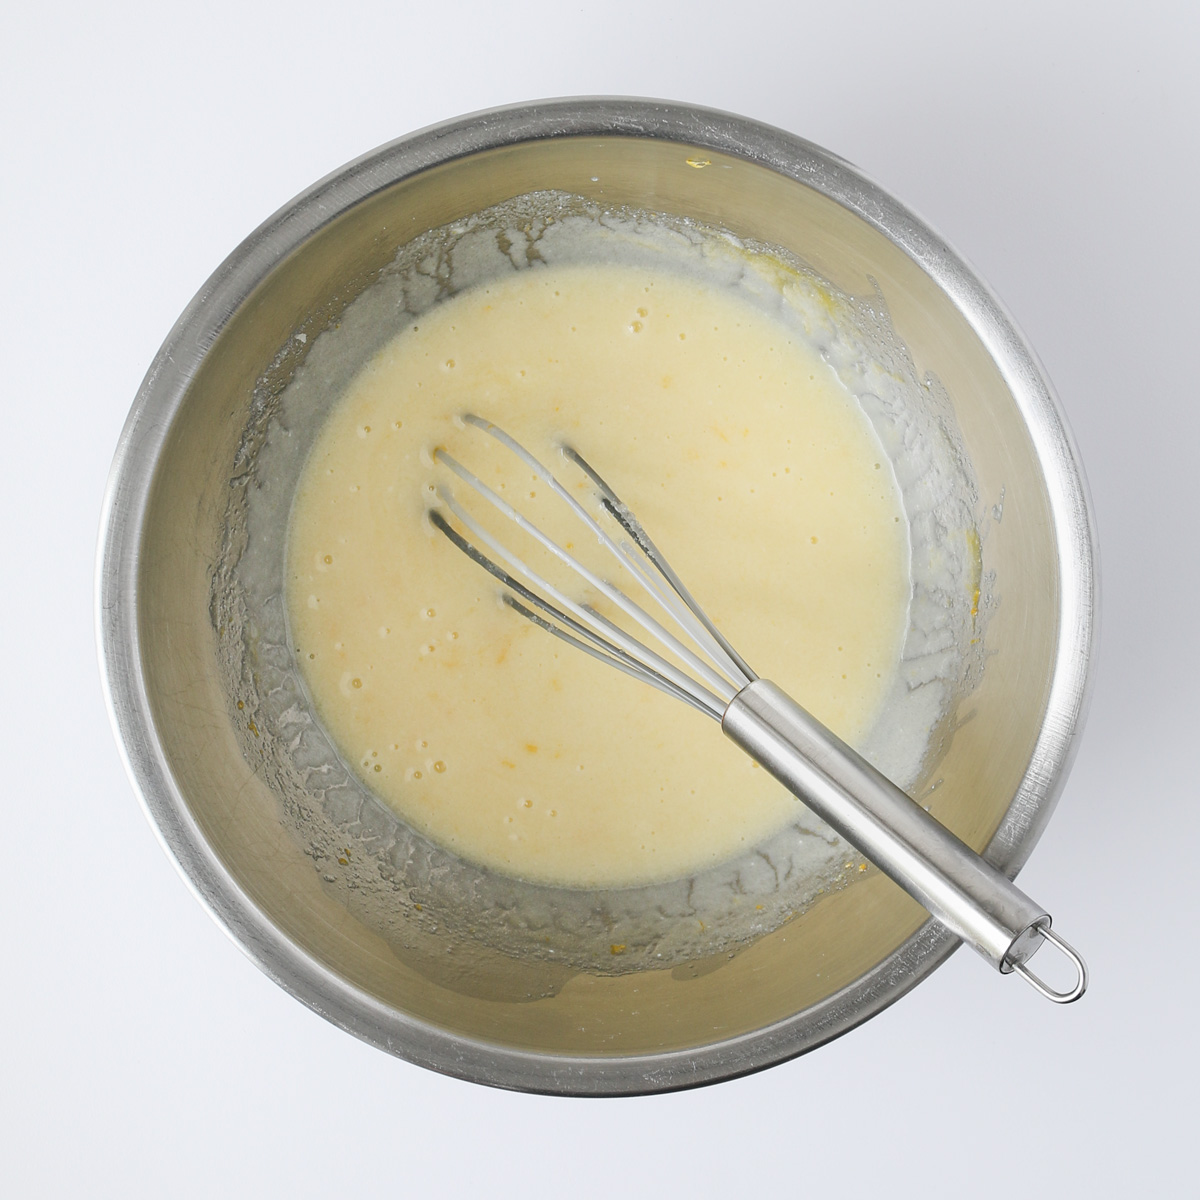 wet ingredients completely combined in mixing bowl, with whisk.